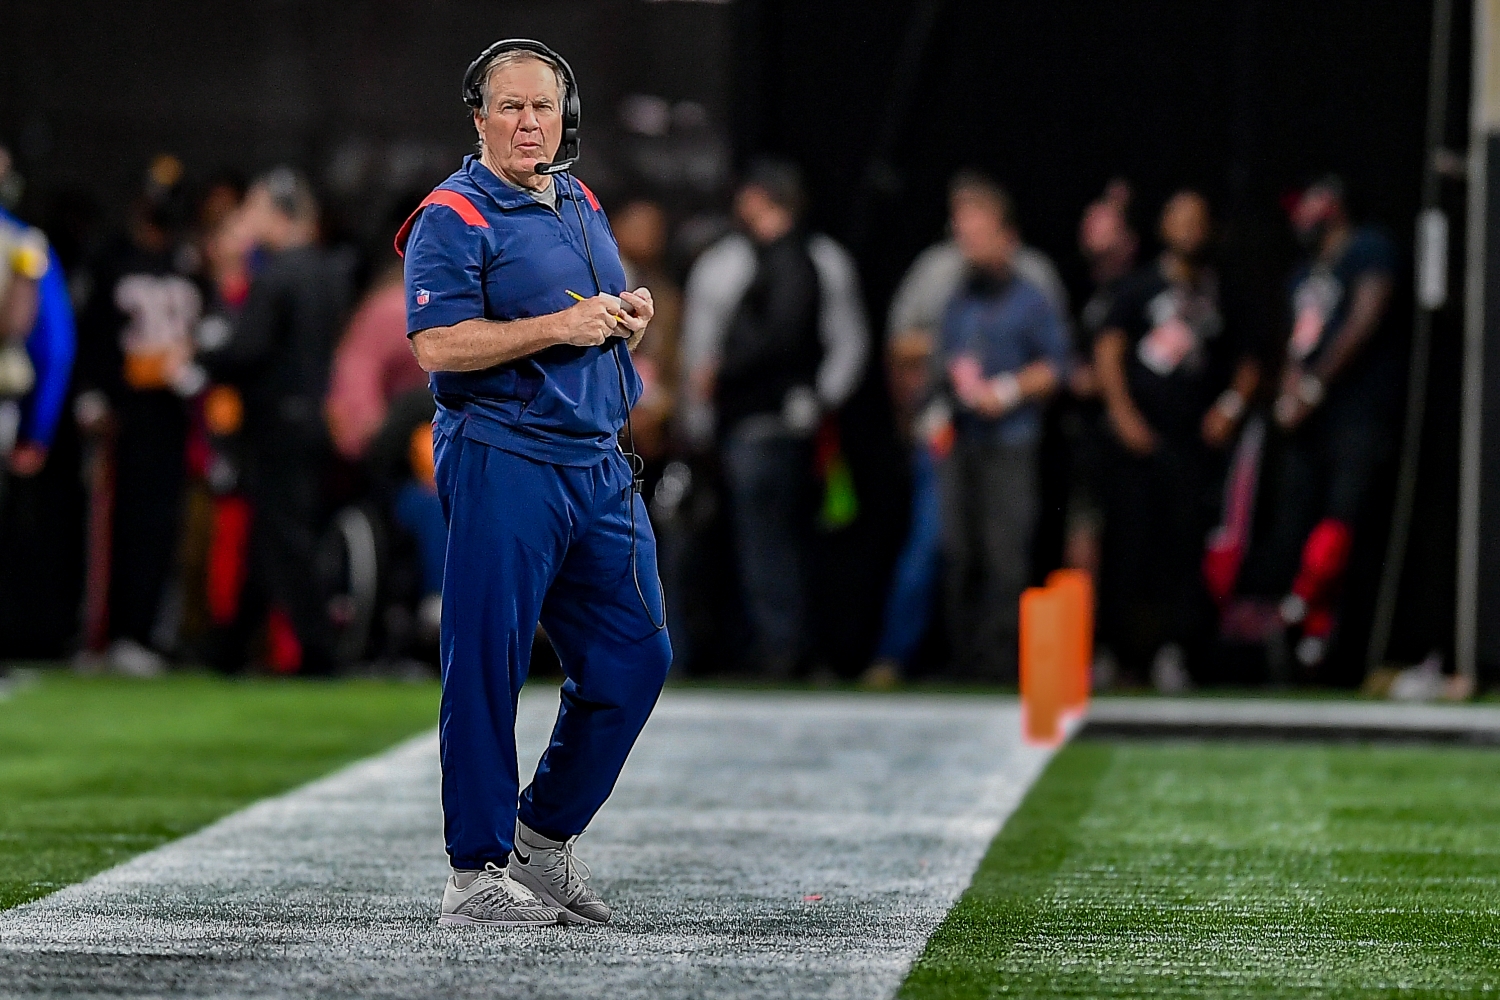 Bill Belichick looks on from the sidelines during a game between the New England Patriots and the Atlanta Falcons.